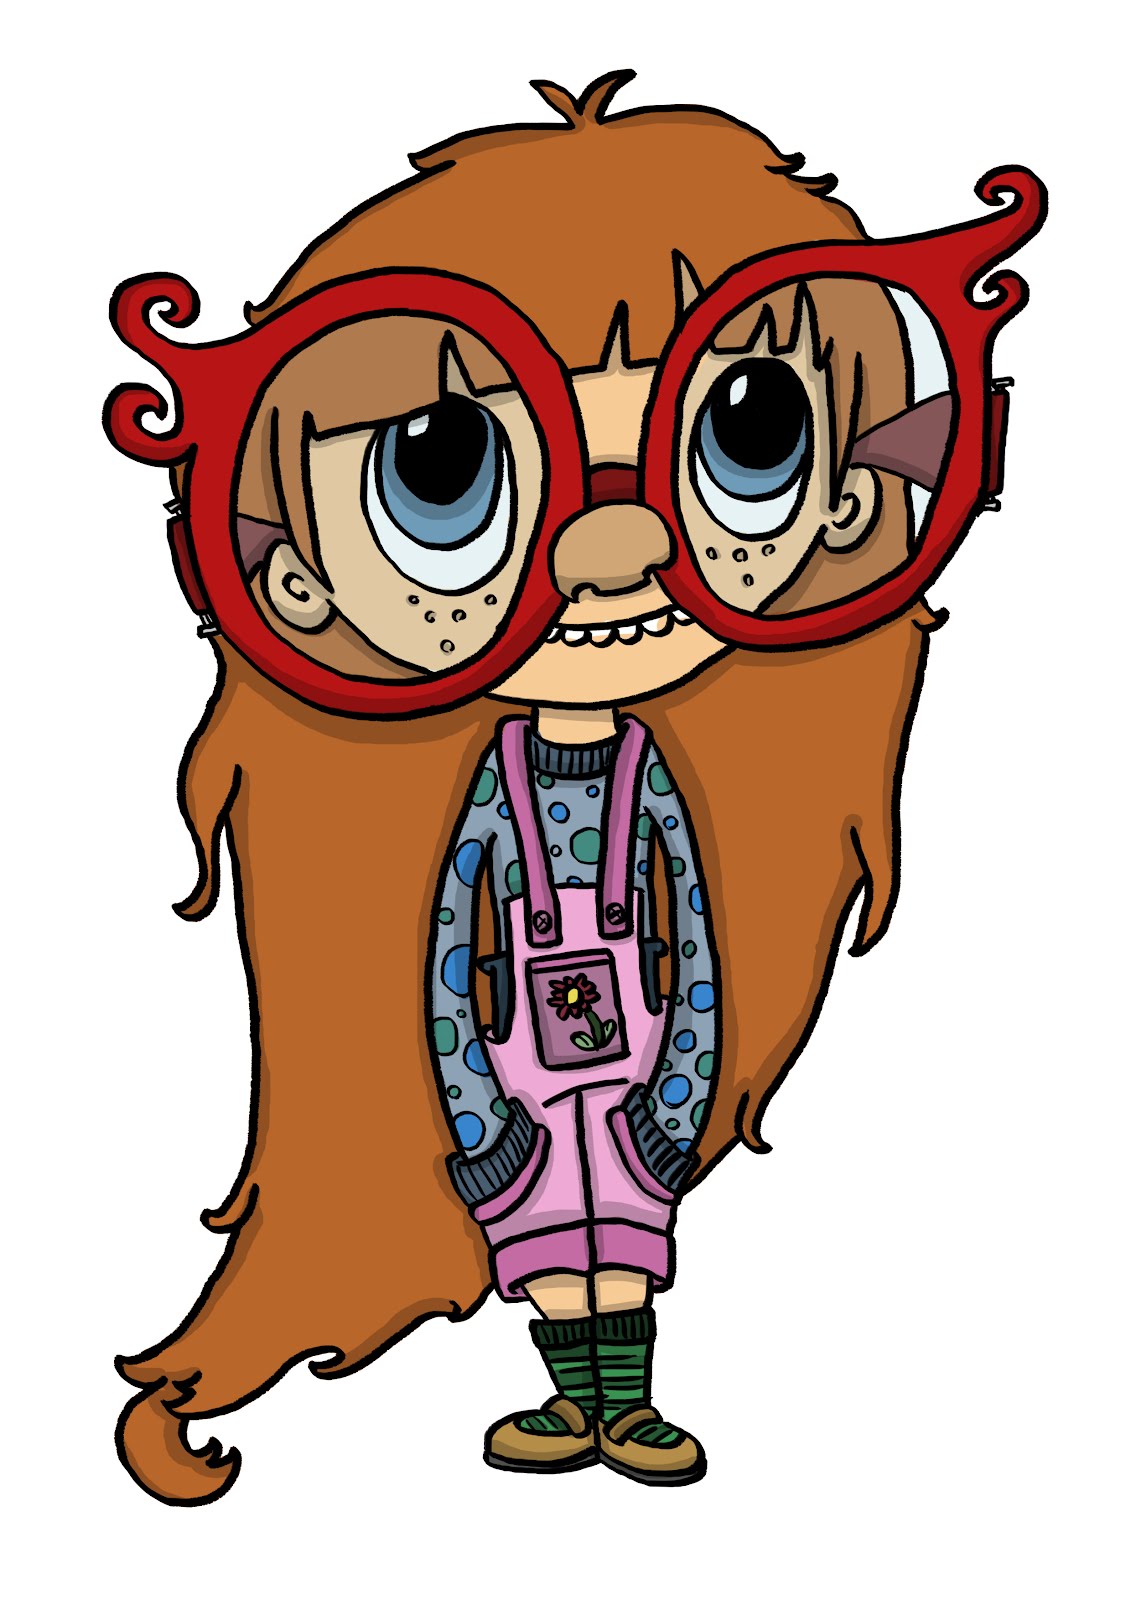 Free Cartoon Characters That Wear Glasses, Download Free Cartoon Characters That Wear Glasses